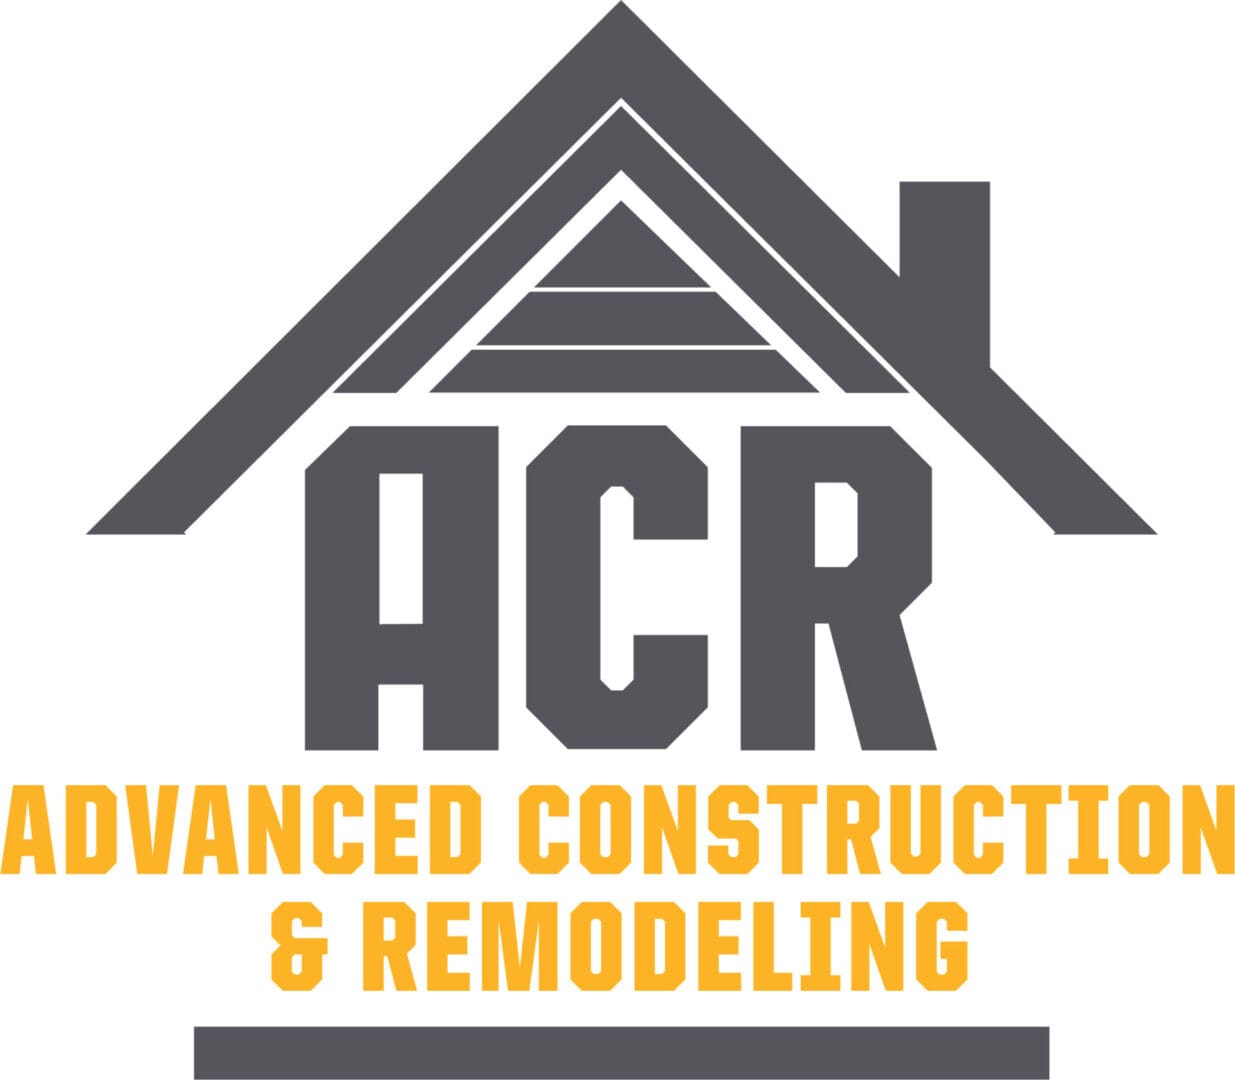 Acr advanced construction & remodeling logo.